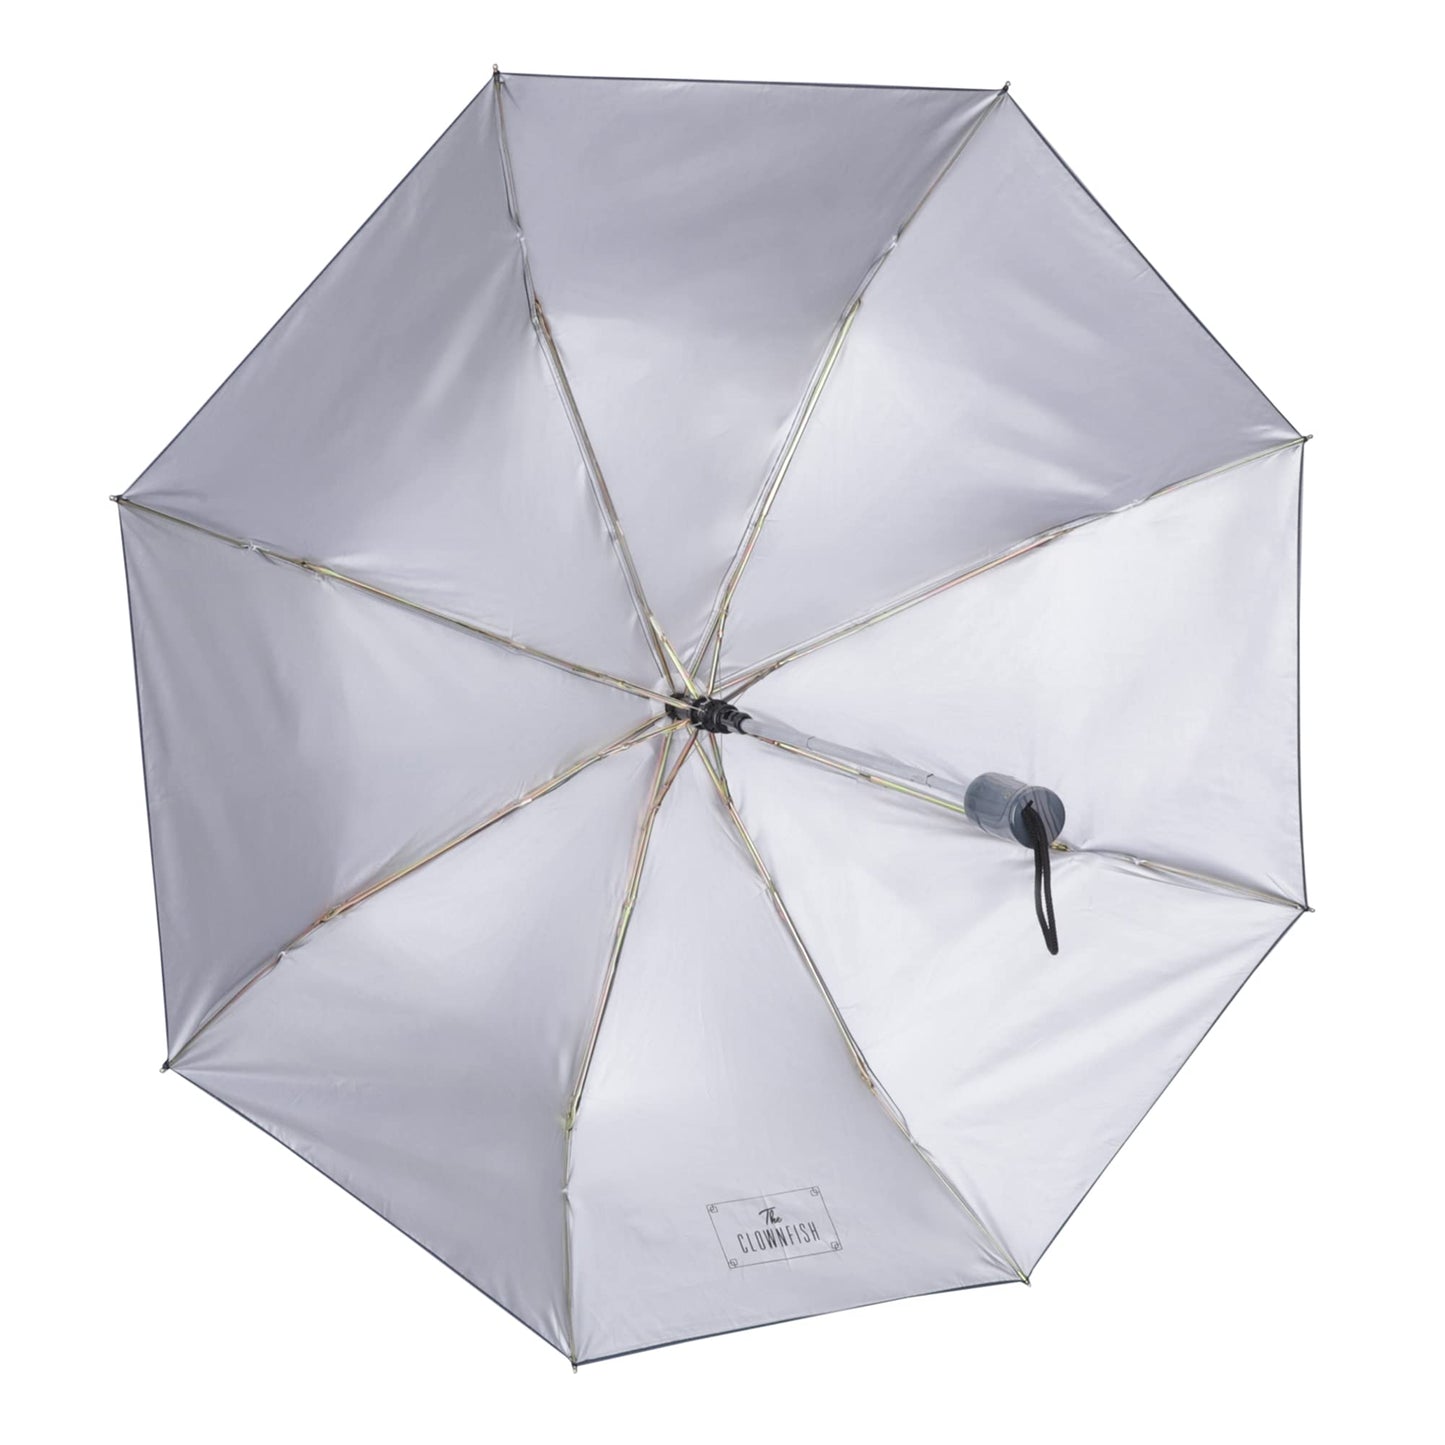 THE CLOWNFISH Umbrella 3 Fold Auto Open Waterproof 190 T Polyester Double Coated Silver Lined Umbrellas For Men and Women (Printed Design- Purple)